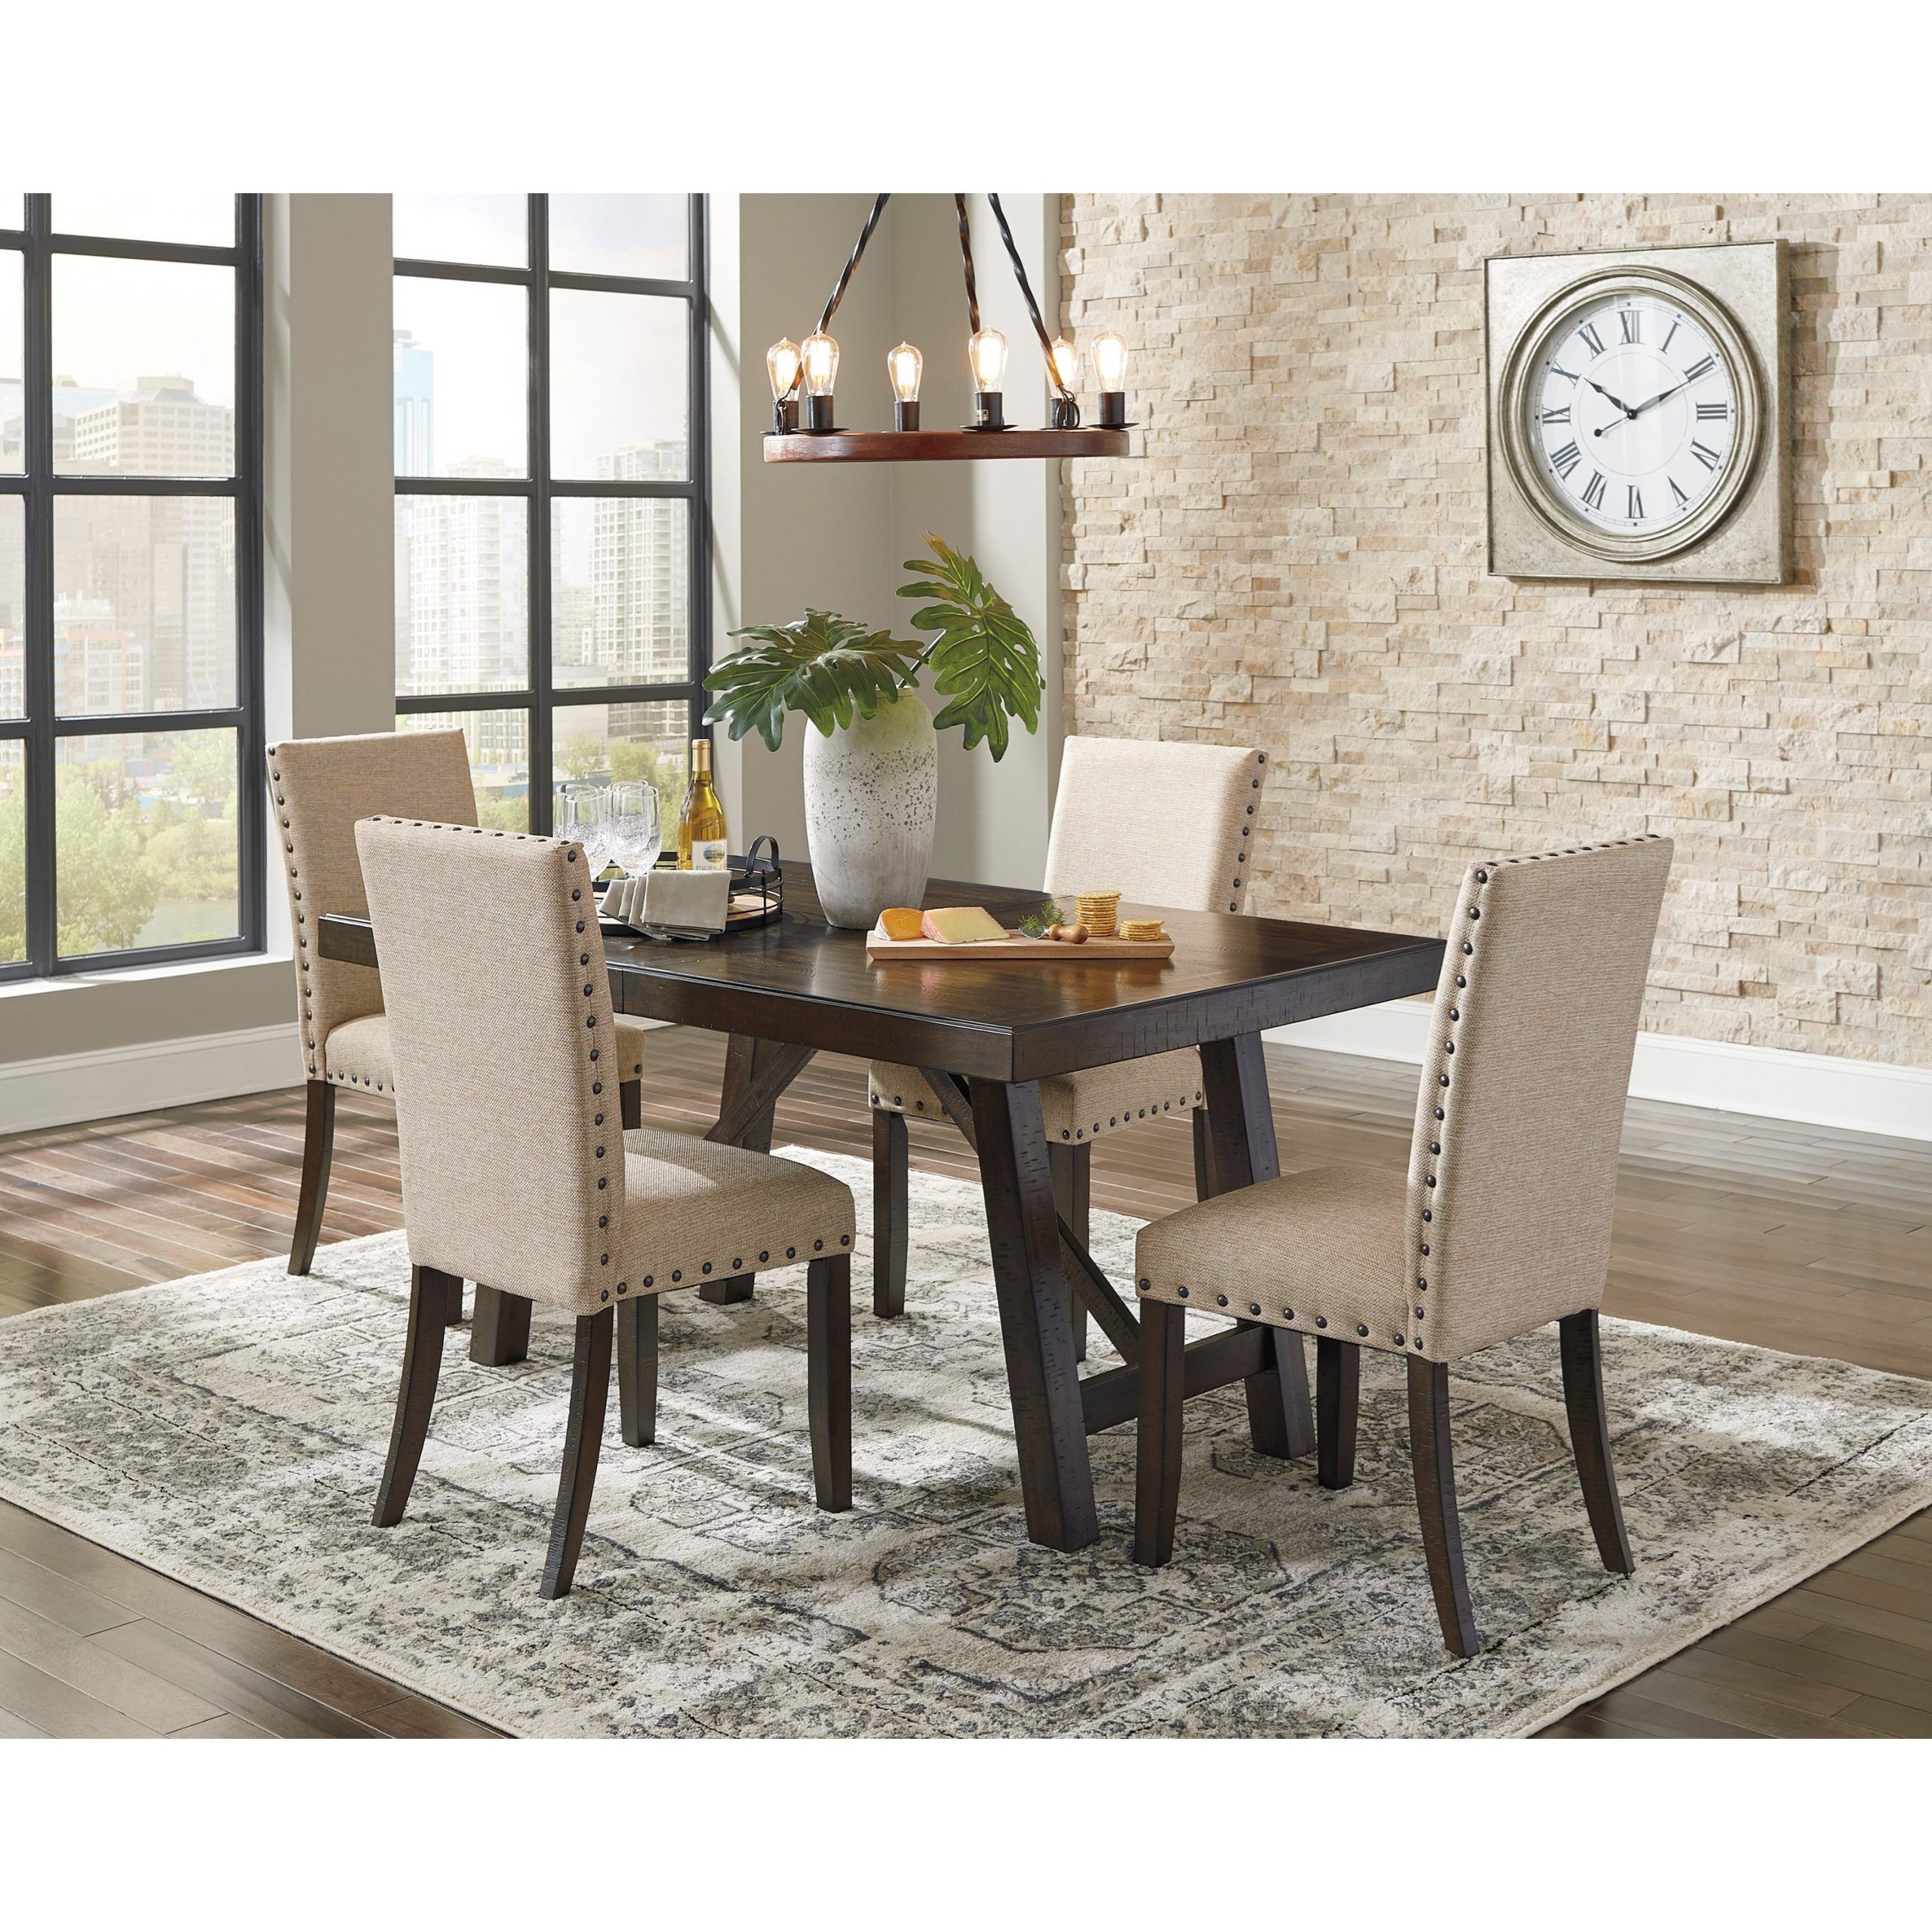 Signature Designashley Rokane Dining Table Set For Inside Most Recent Eleni 35'' Dining Tables (View 11 of 15)